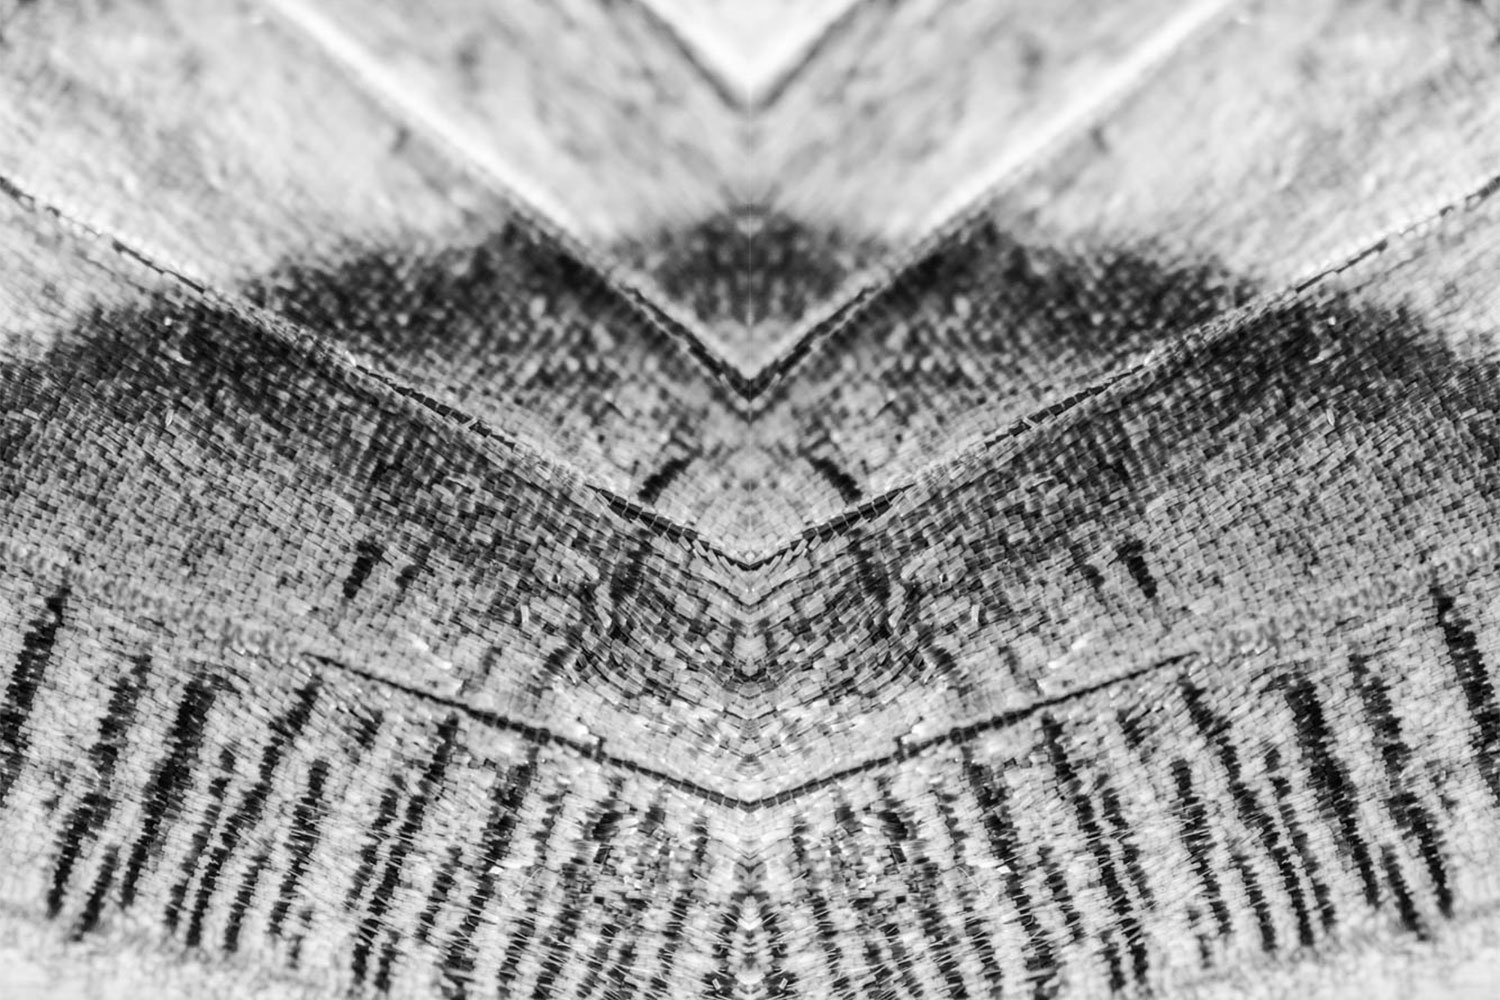 Butterfly wings spread art work in black and white